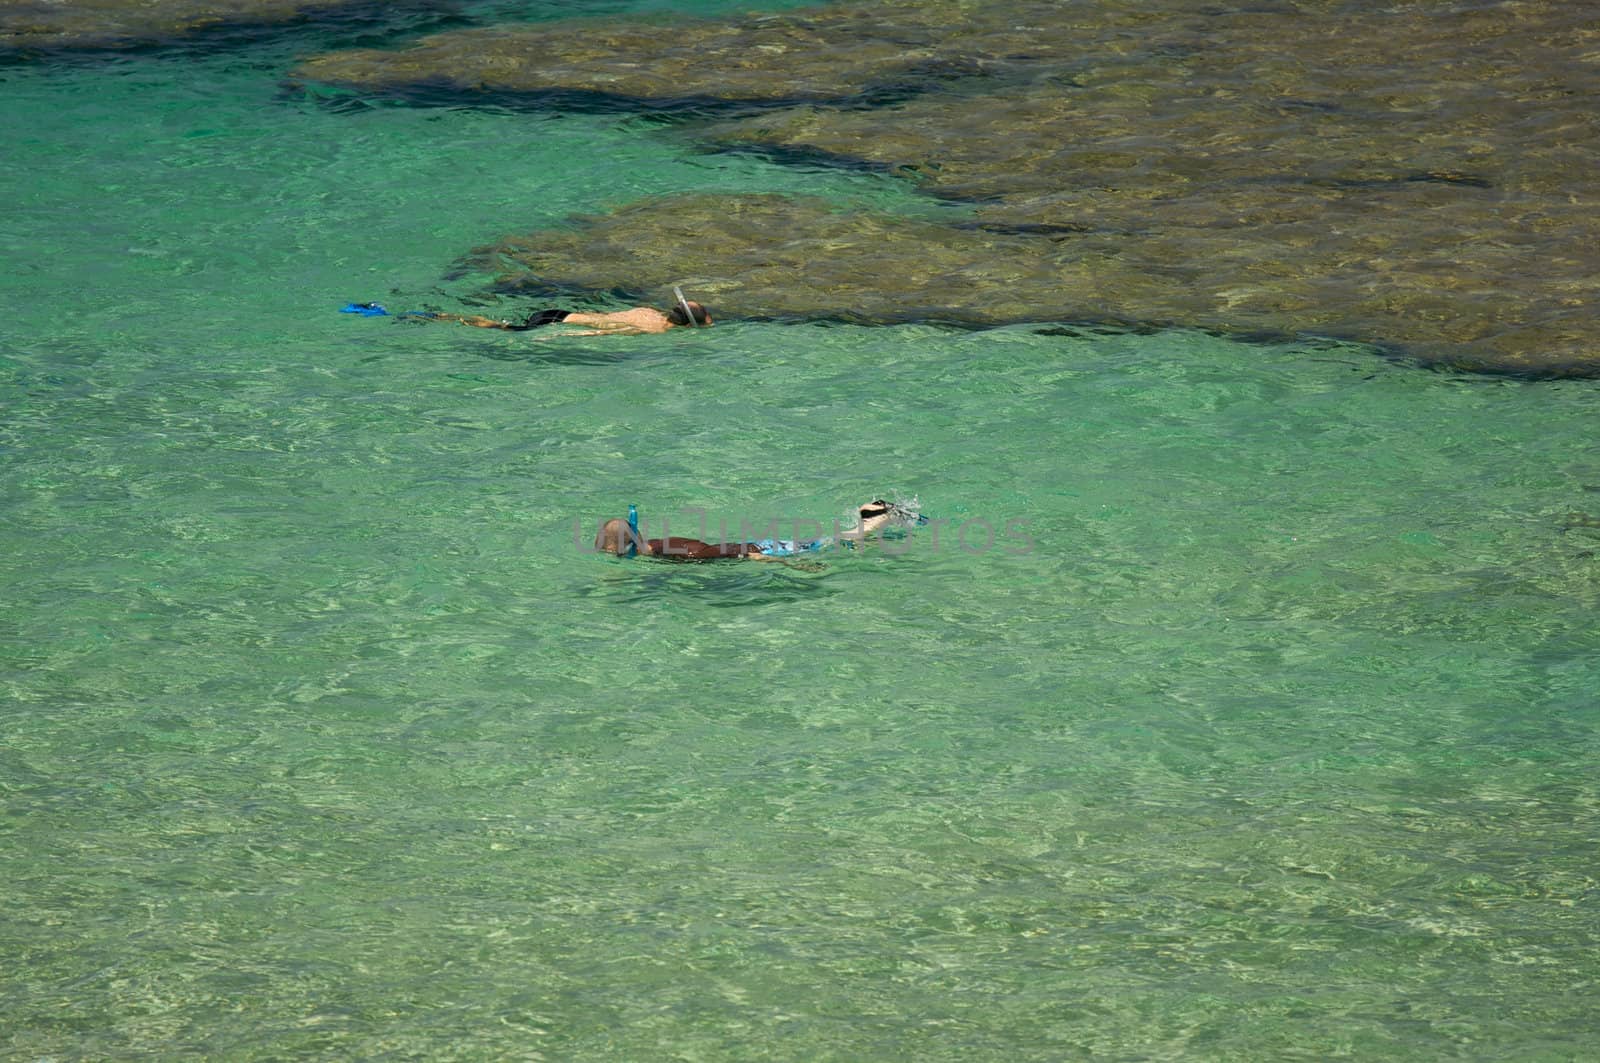 Snorkelers in the Clear Tropical Waters on a Relaxing Summer Day